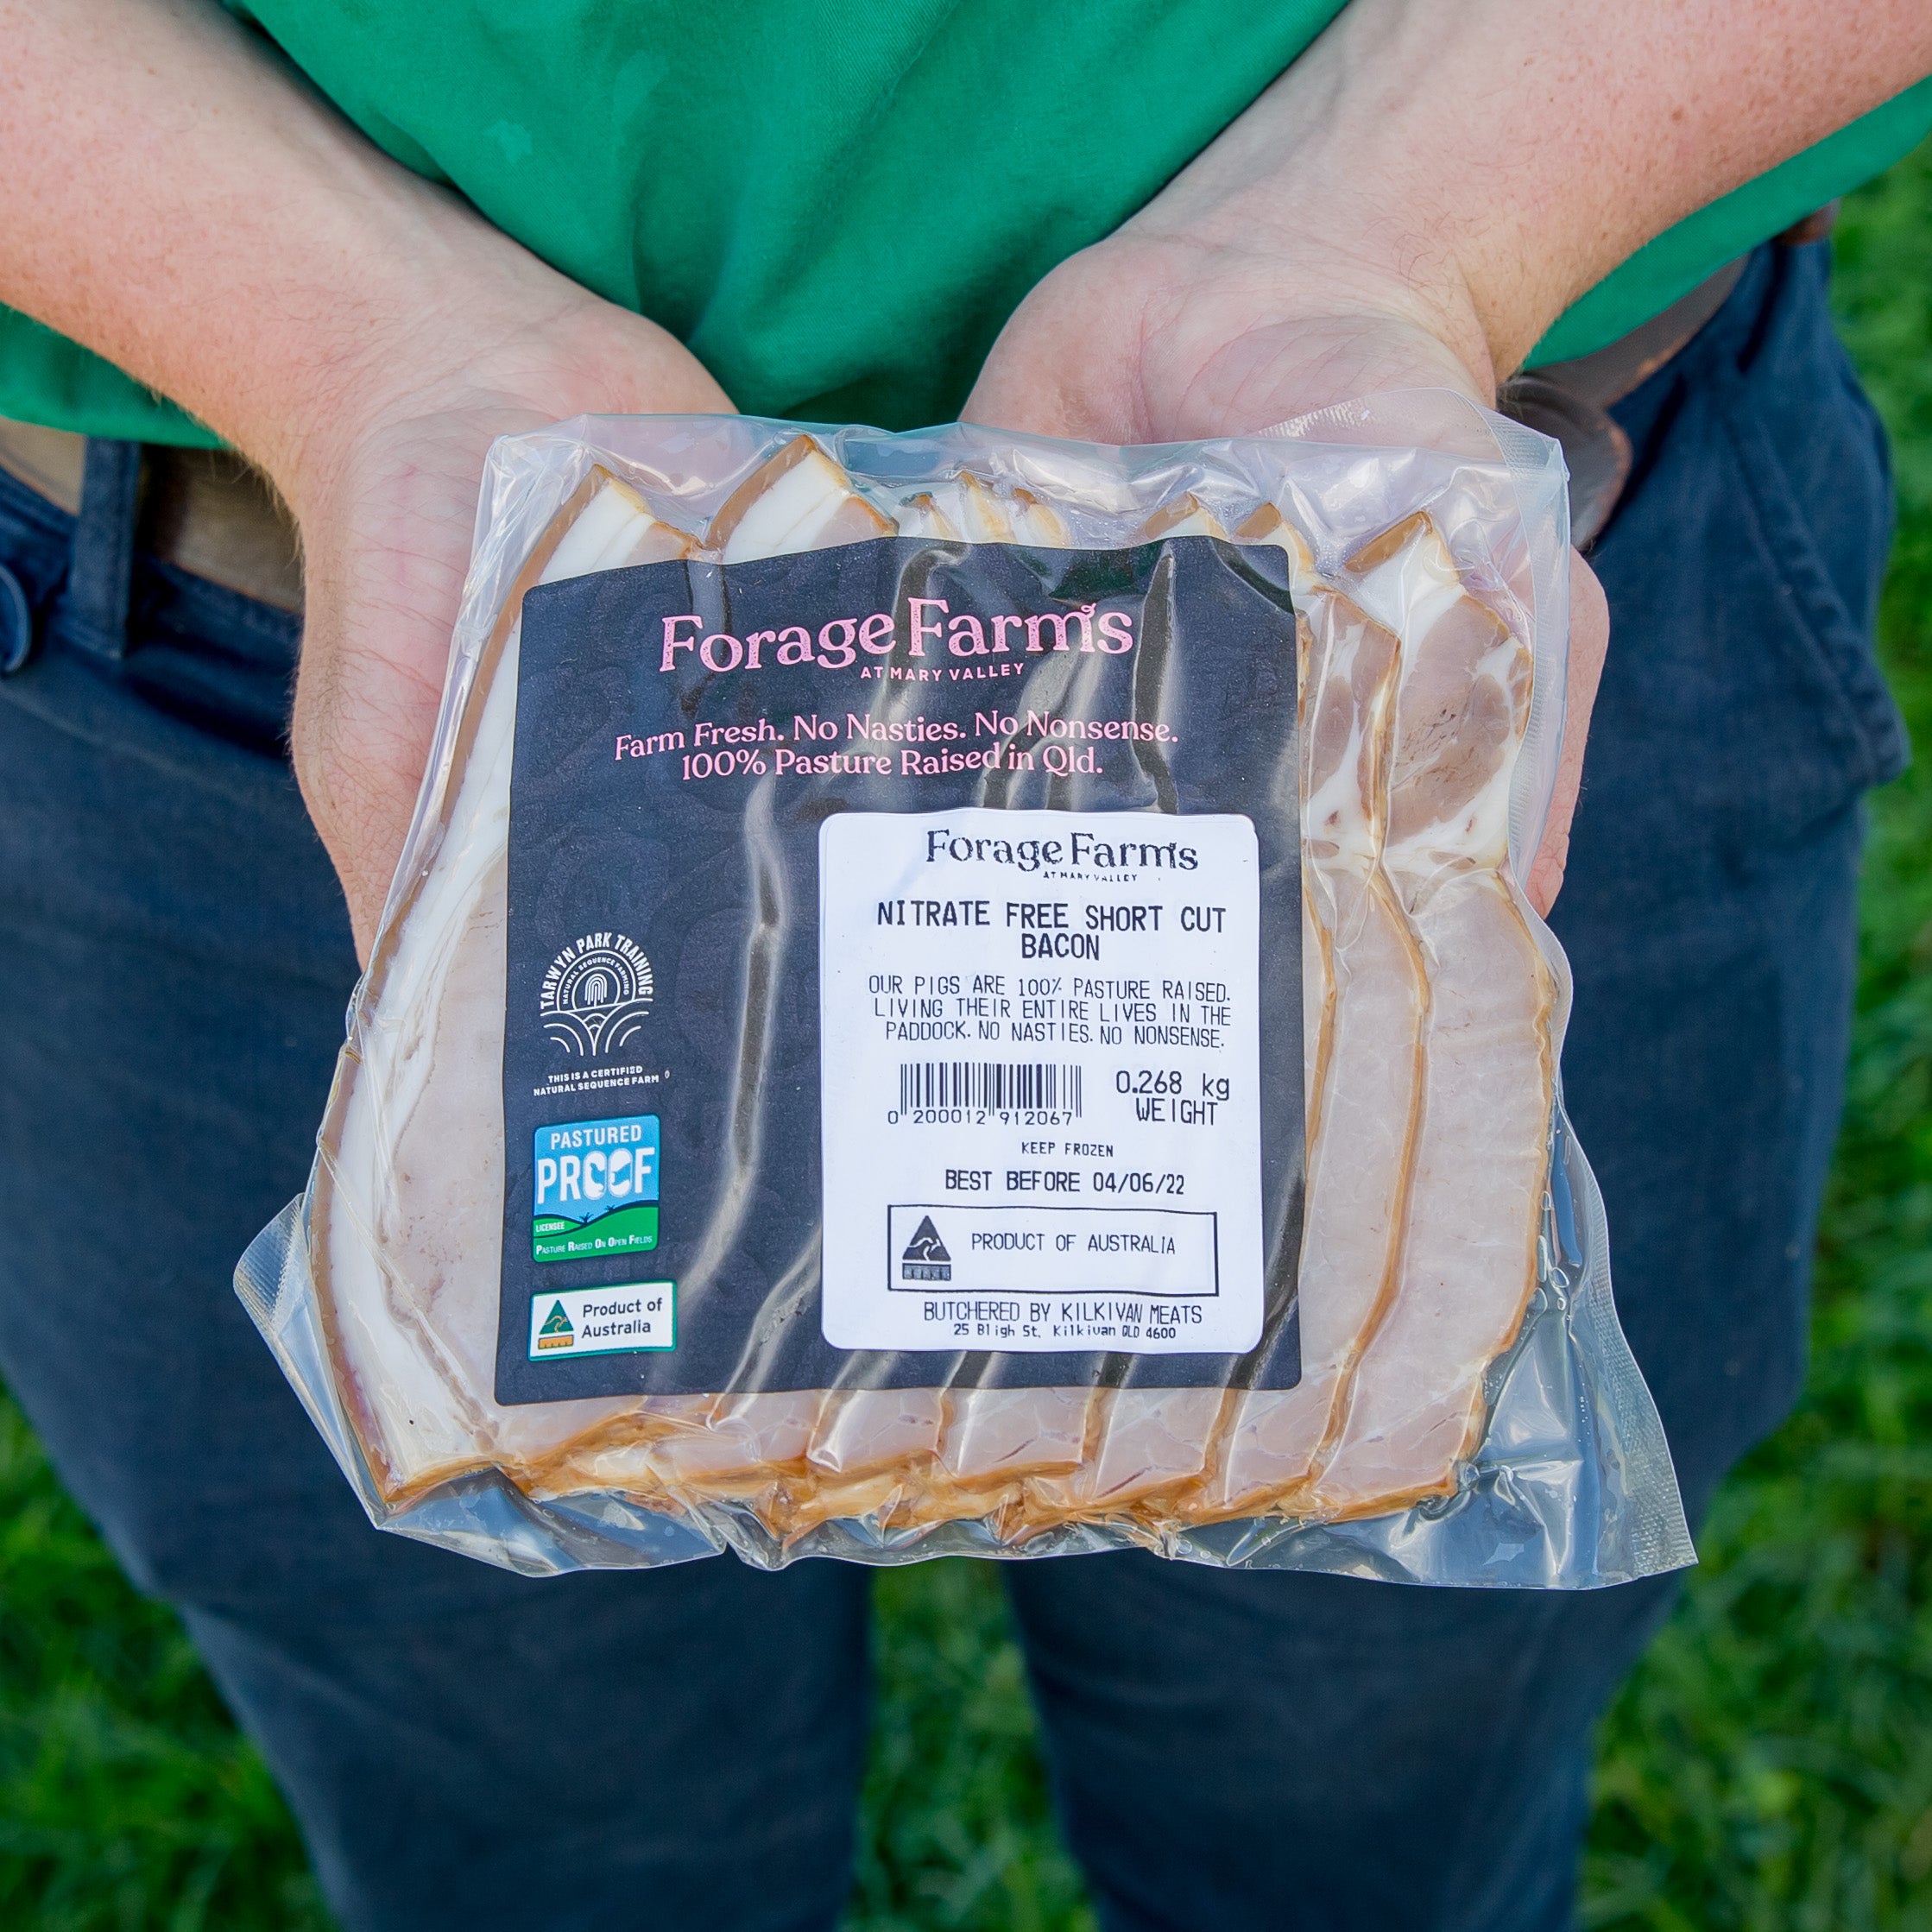 Forage Farms Pasture-Raised Nitrate-Free Short Cut Bacon